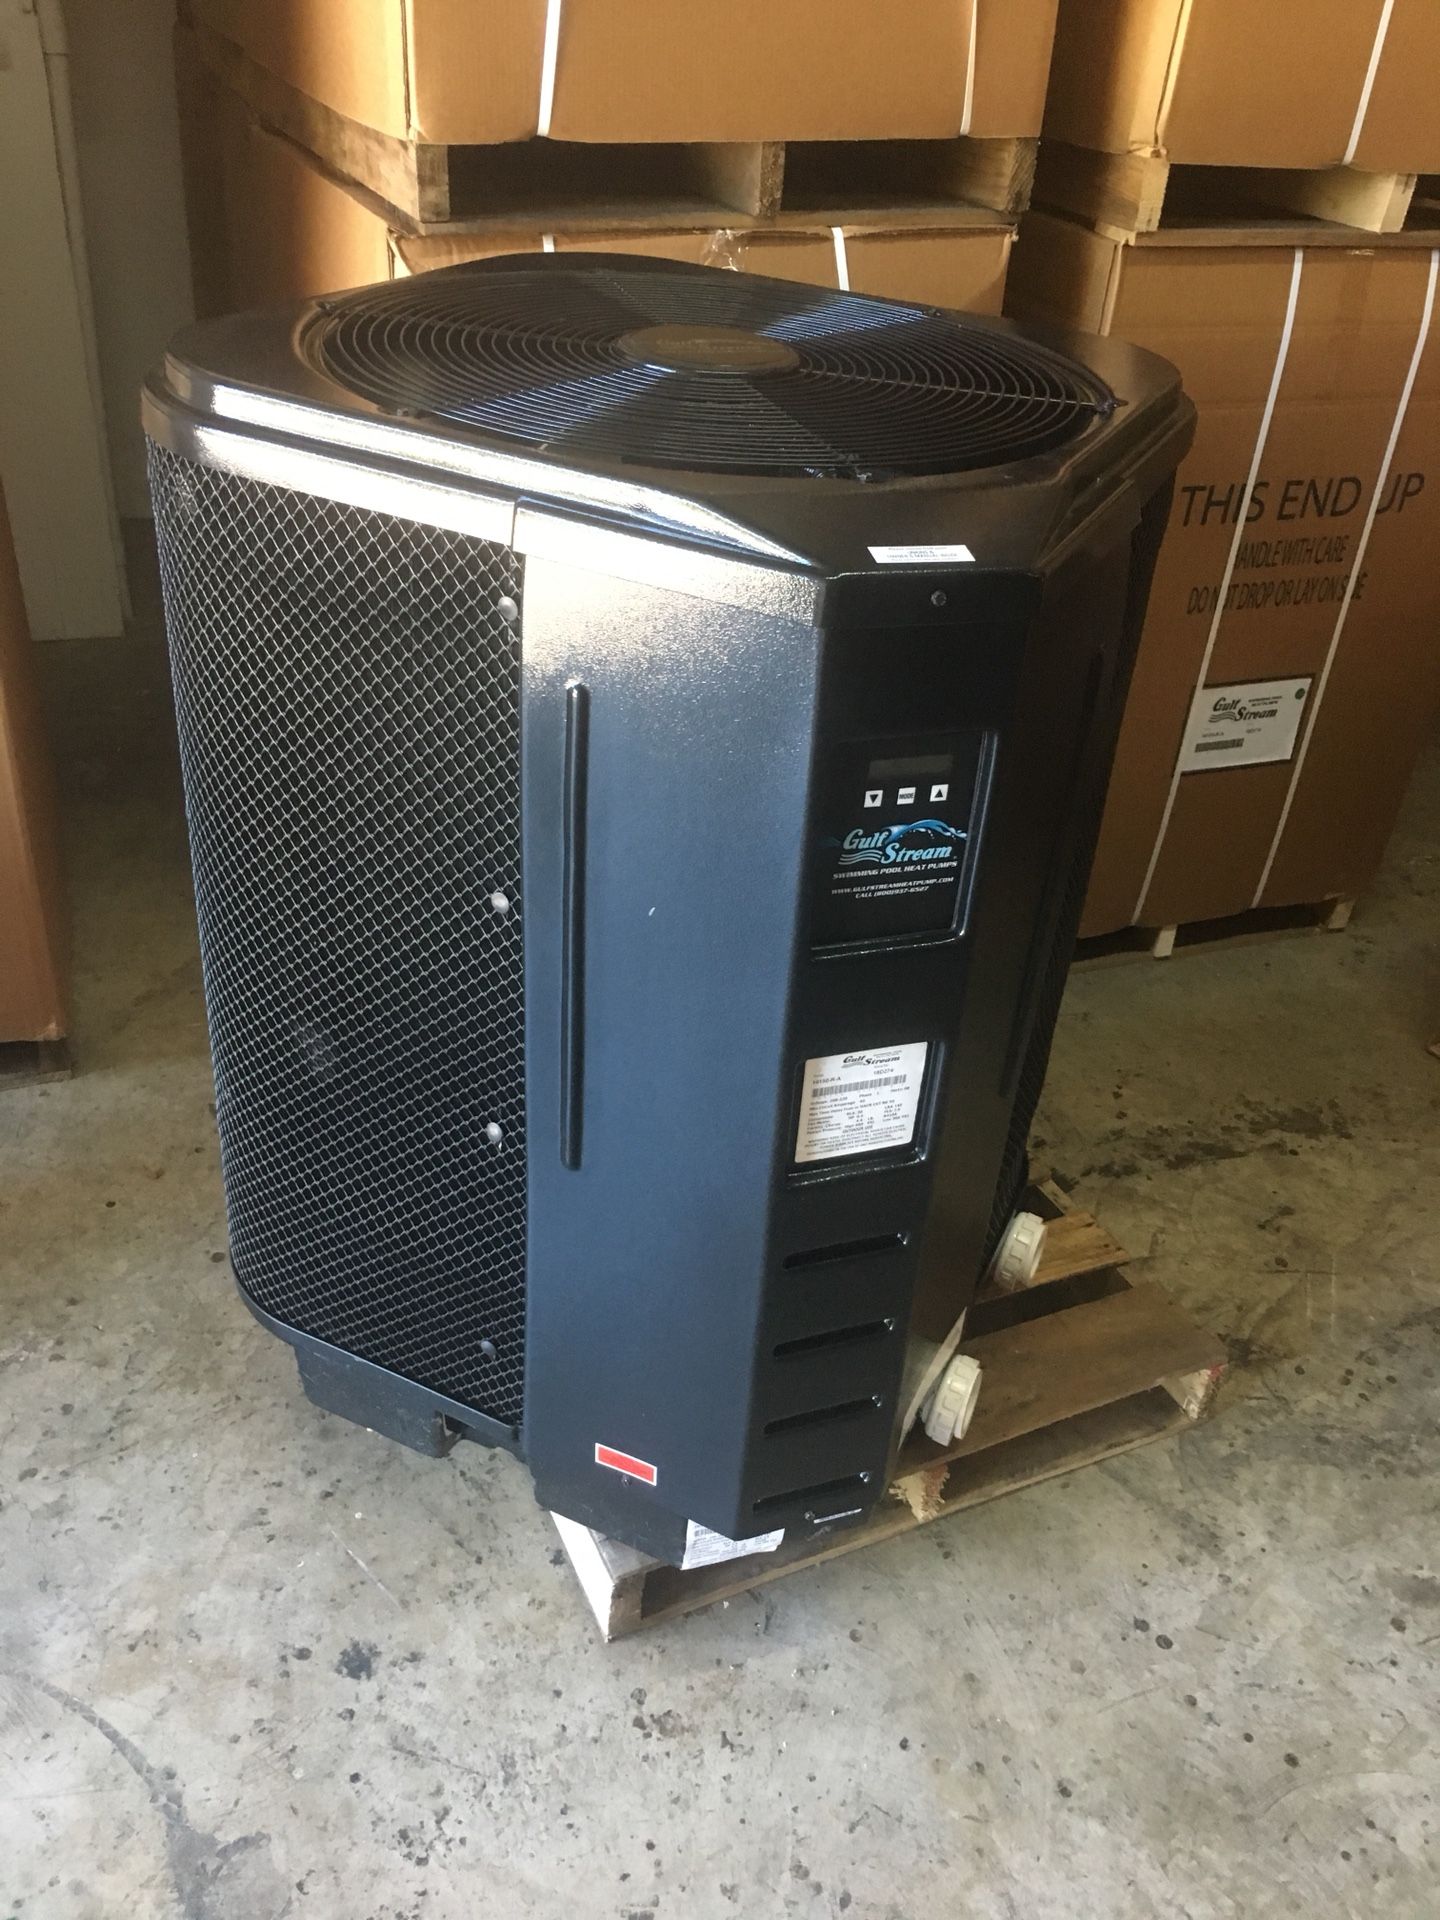 NEED A POOL HEATER AND INSTALLATION? SEND ME A MESSAGE FOR AN ESTIMATE!